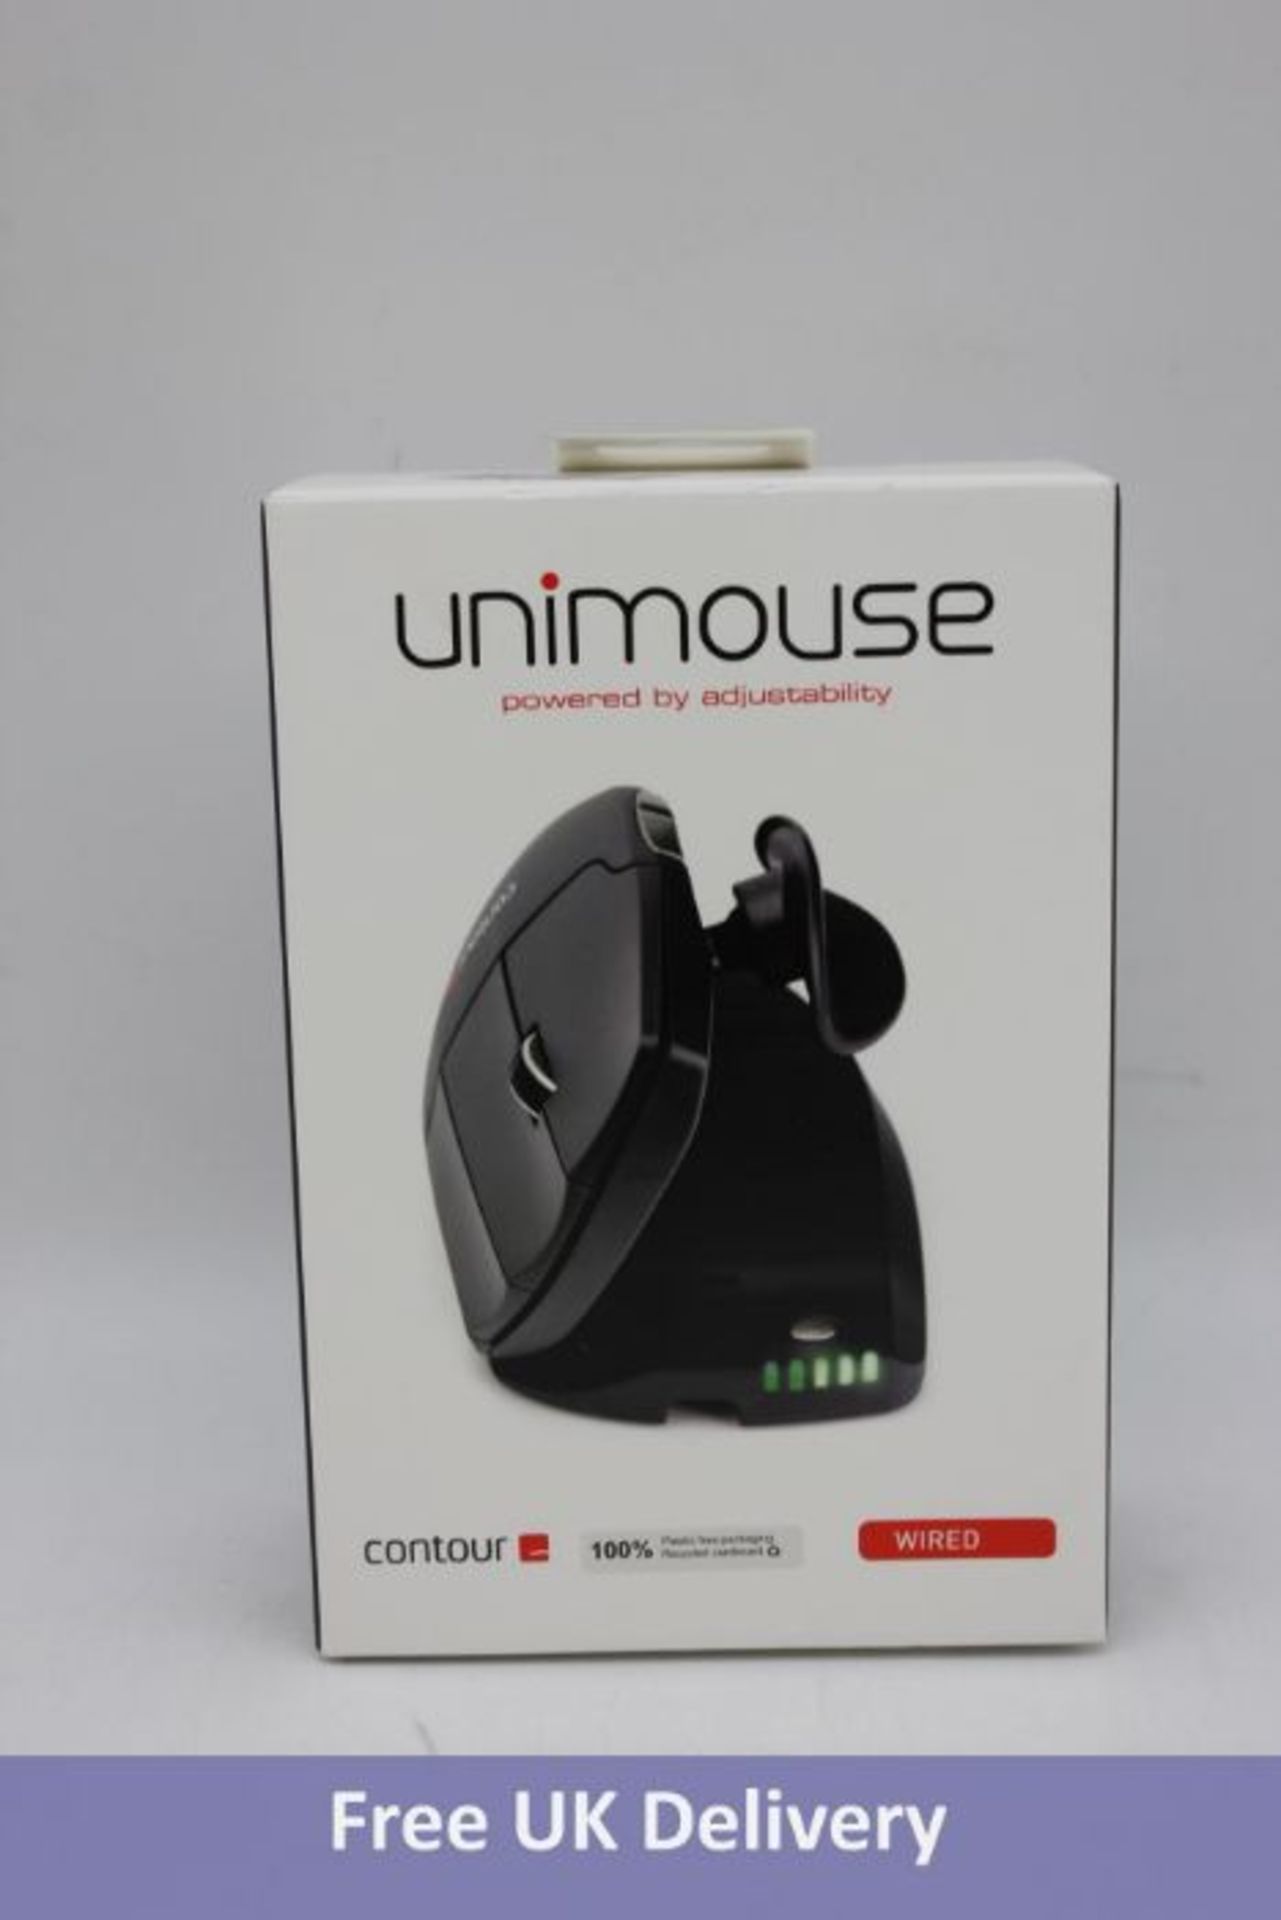 Contour Unimouse with Thumb support, Black